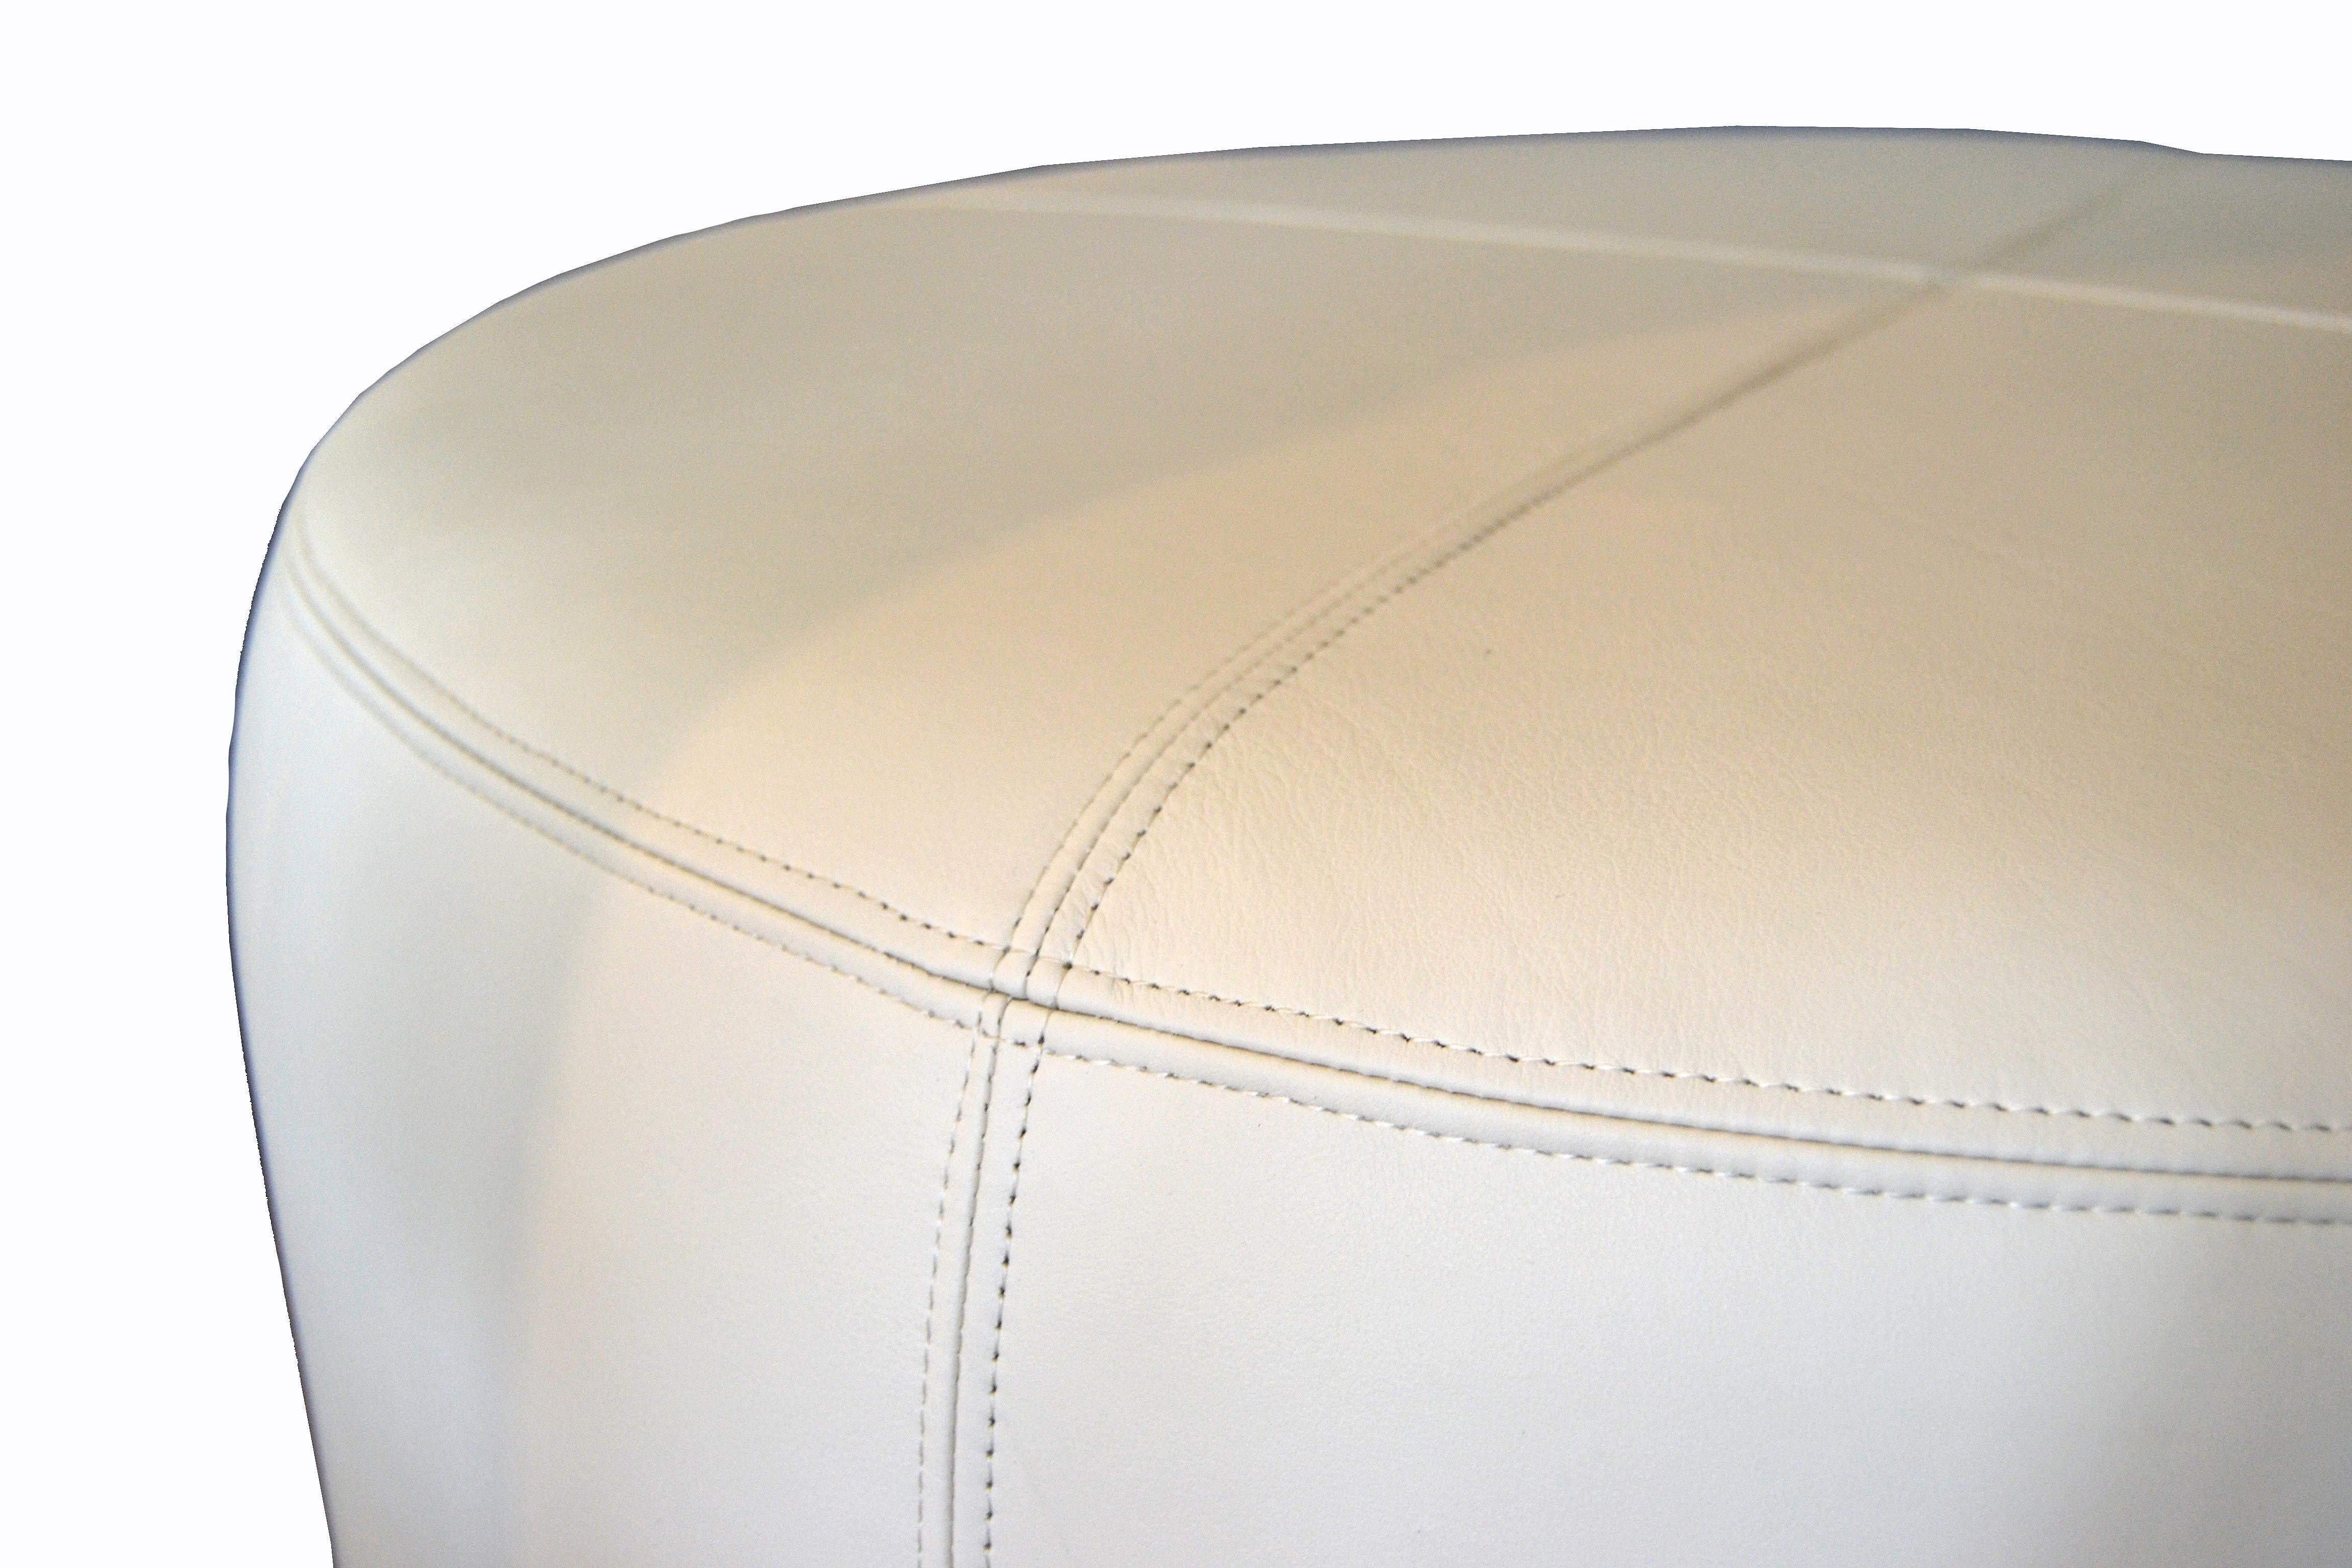 Modern Round Handcrafted Leather Ottoman, Pouf in Beige Leather, Contemporary 1